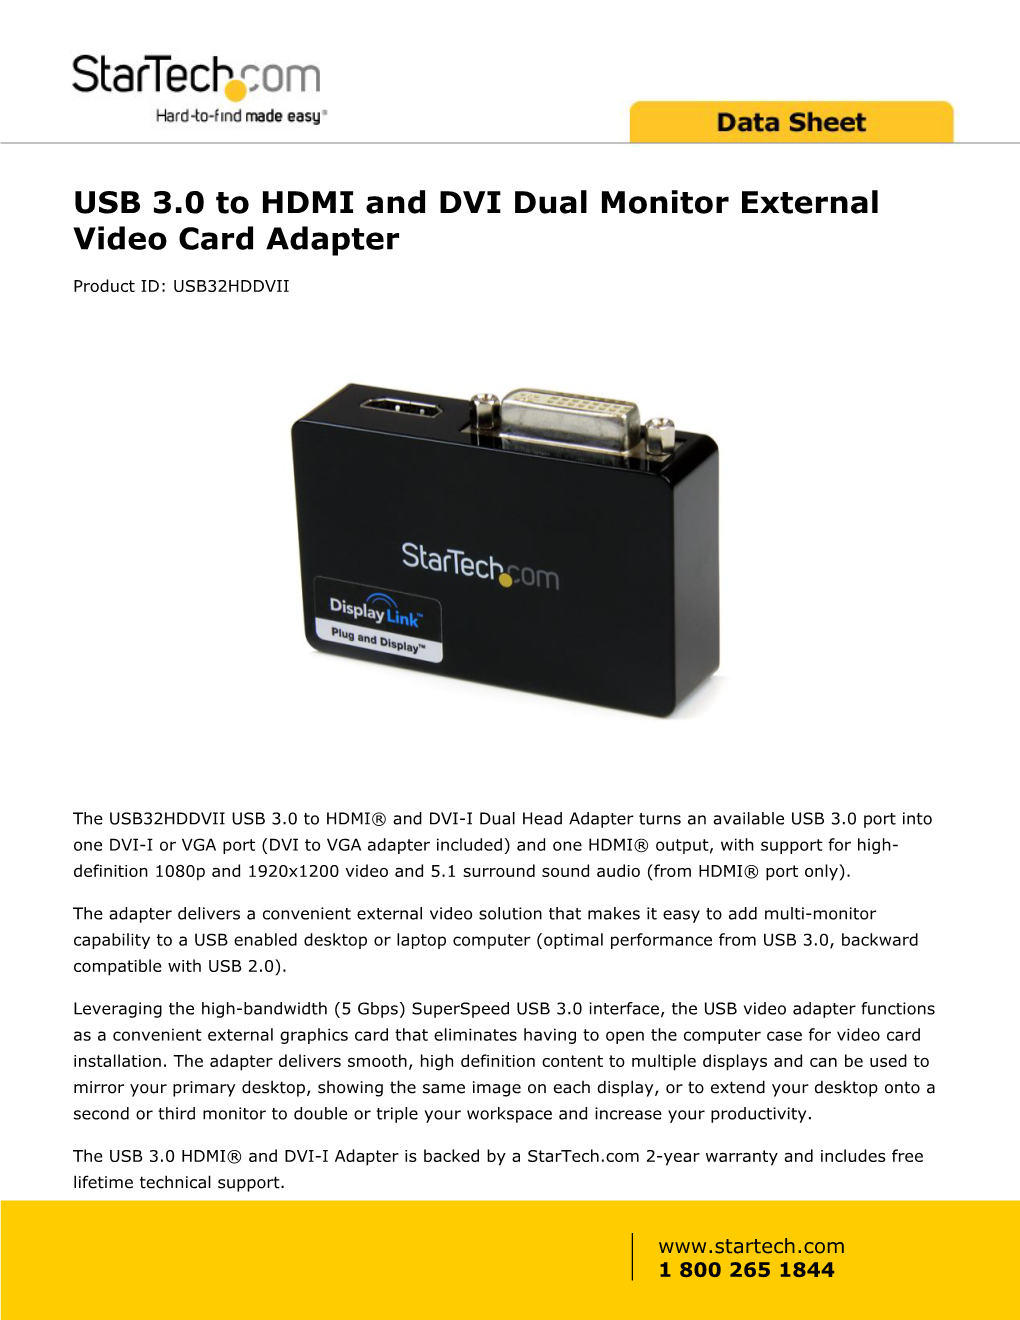 USB 3.0 to HDMI and DVI Dual Monitor External Video Card Adapter